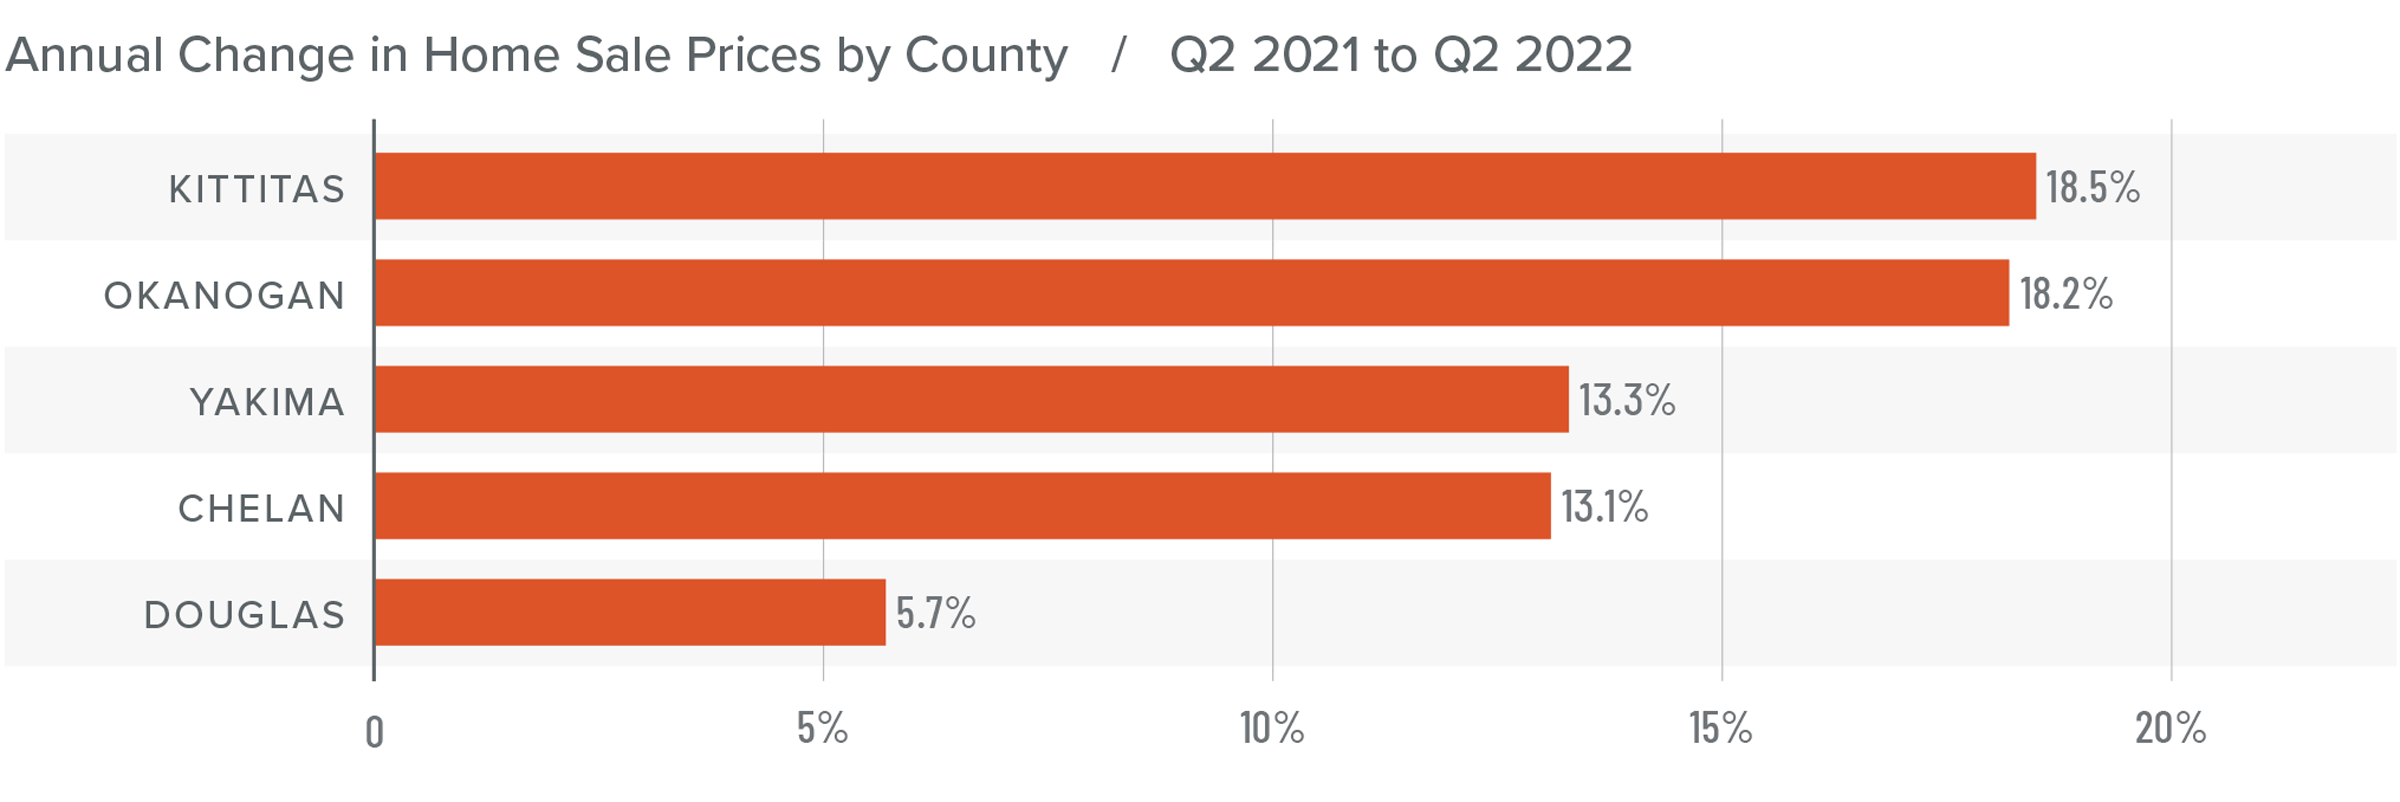 A bar graph showing the annual change in home sale prices for various counties in Central Washington from Q2 2021 to Q2 2022. Kittitas County tops the list at 18.5%, followed by Okanogan at 18.2%, Yakima at 13.3%, Chelan at 13.1%, and Douglas County at 5.7%.